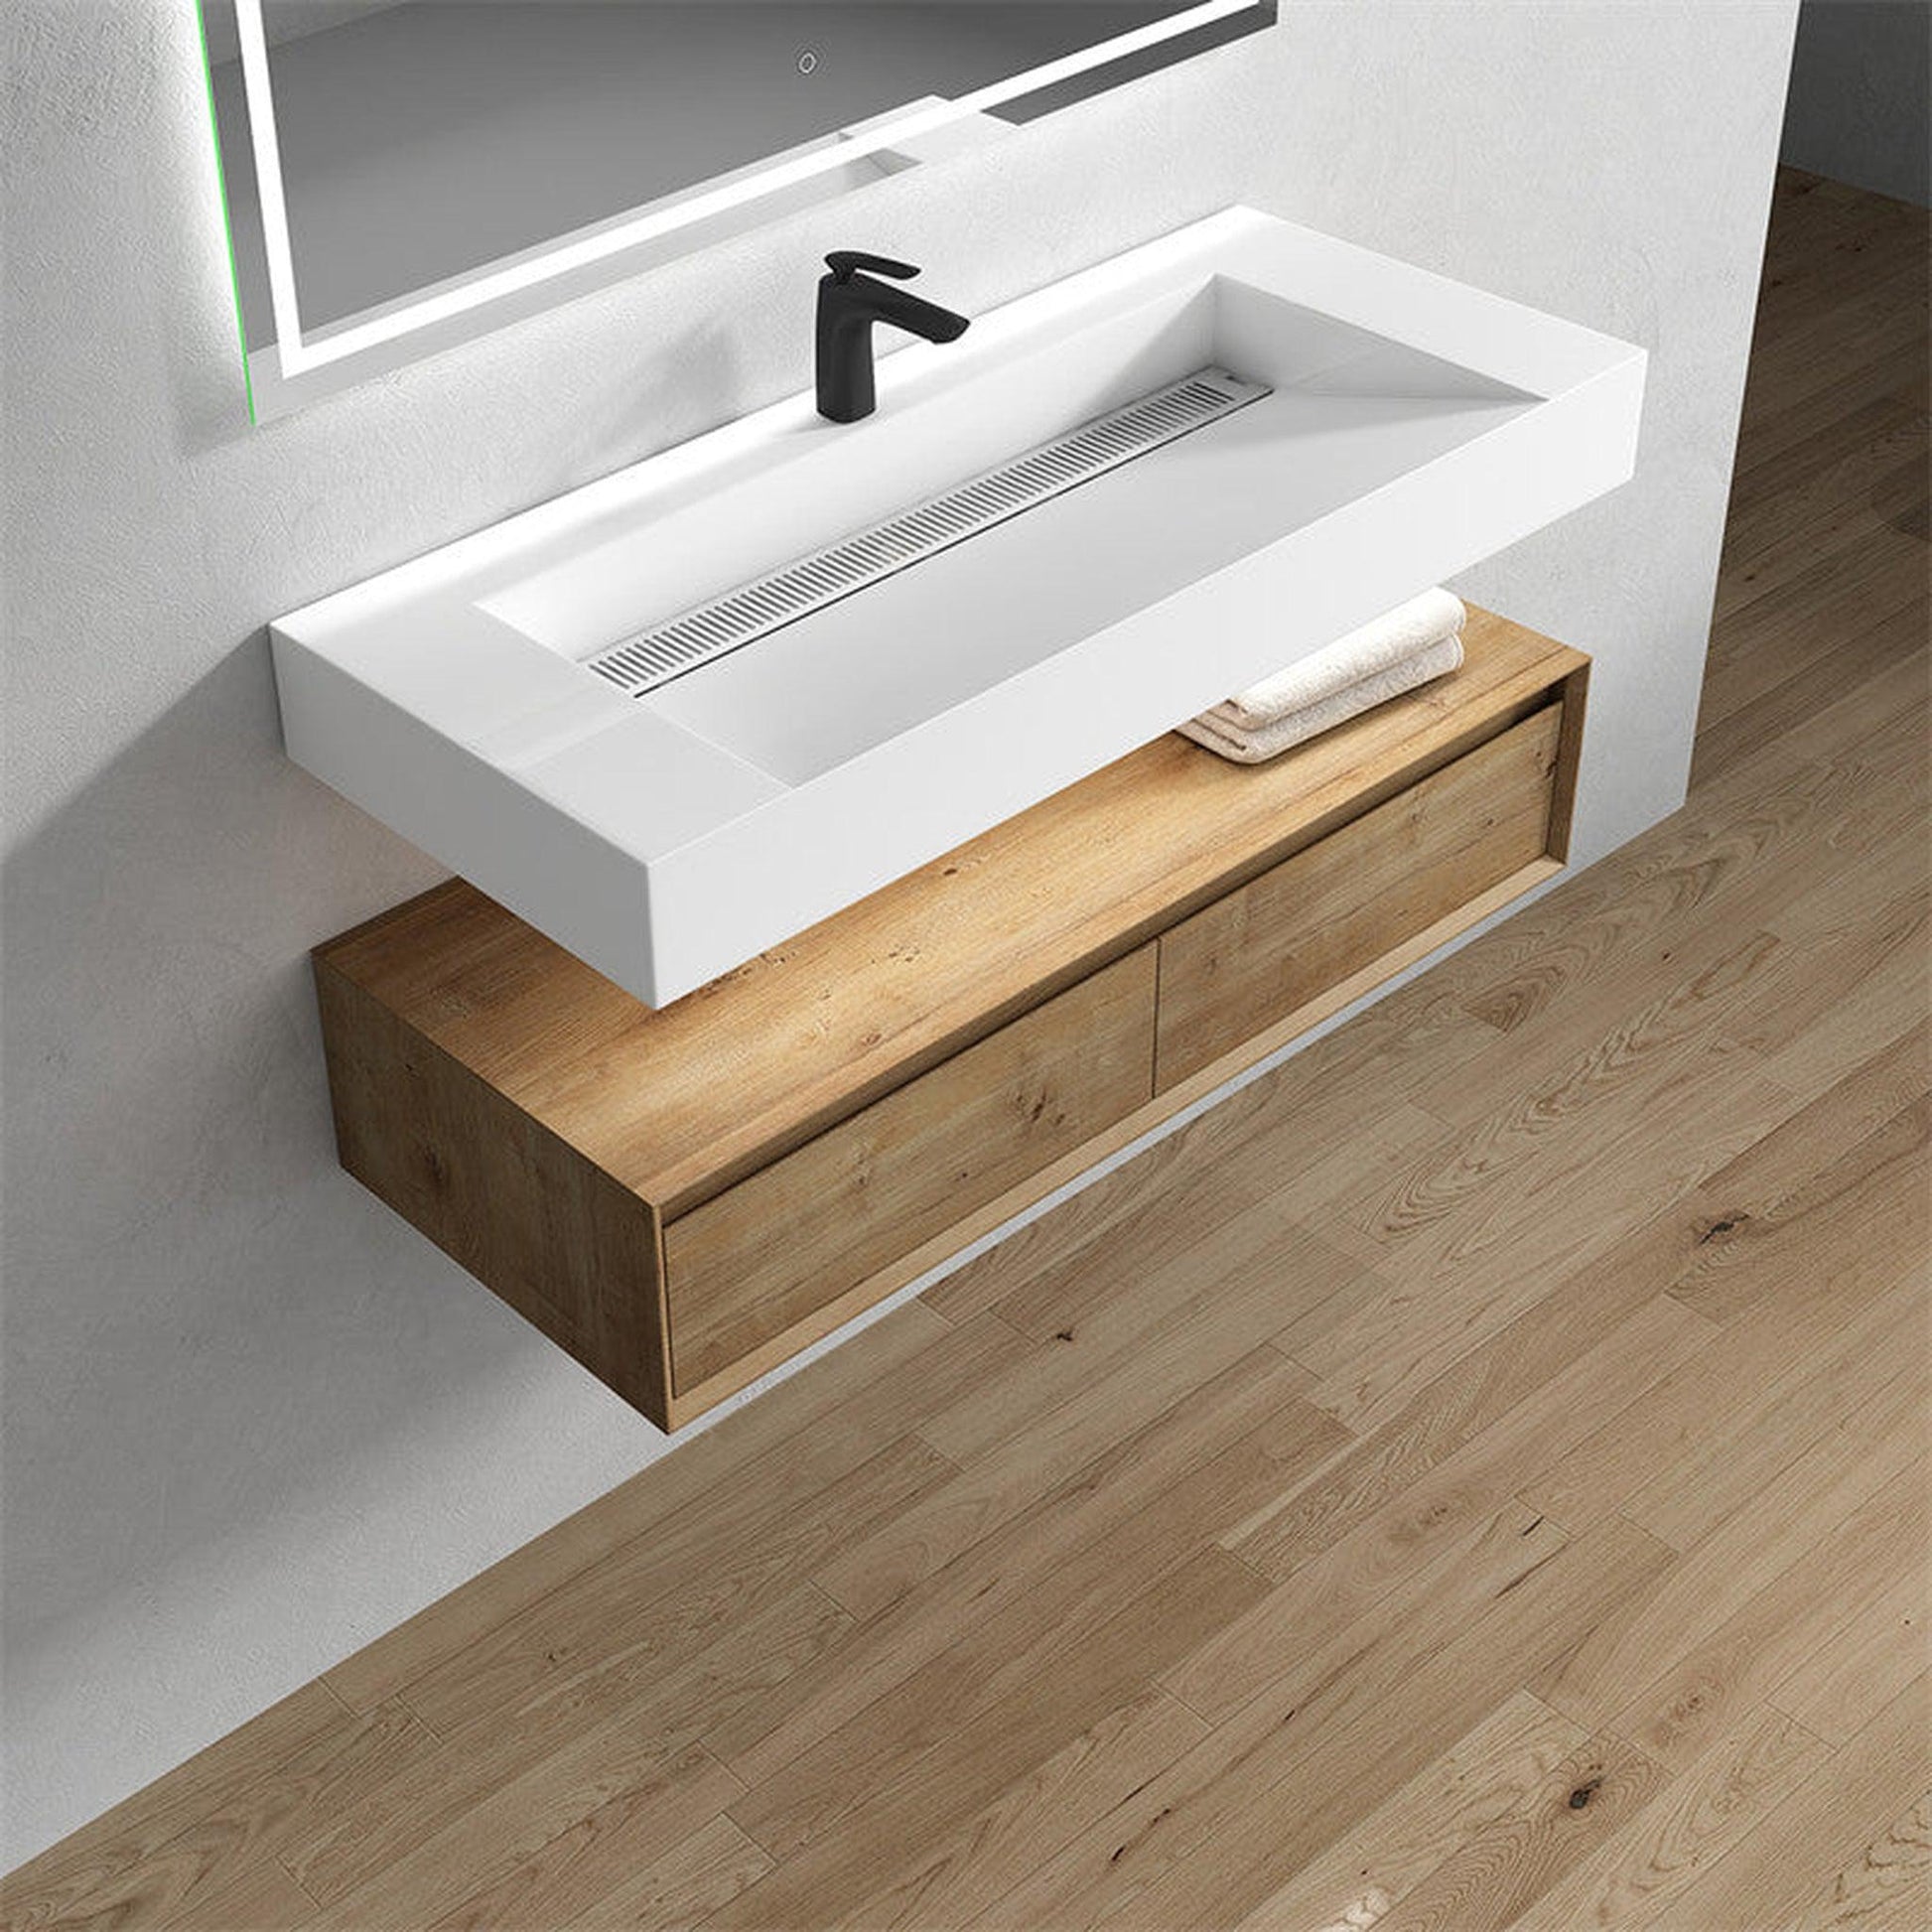 Moreno Bath ALYSA 60" White Oak Floating Vanity With Single Faucet Hole and Reinforced White Acrylic Sink